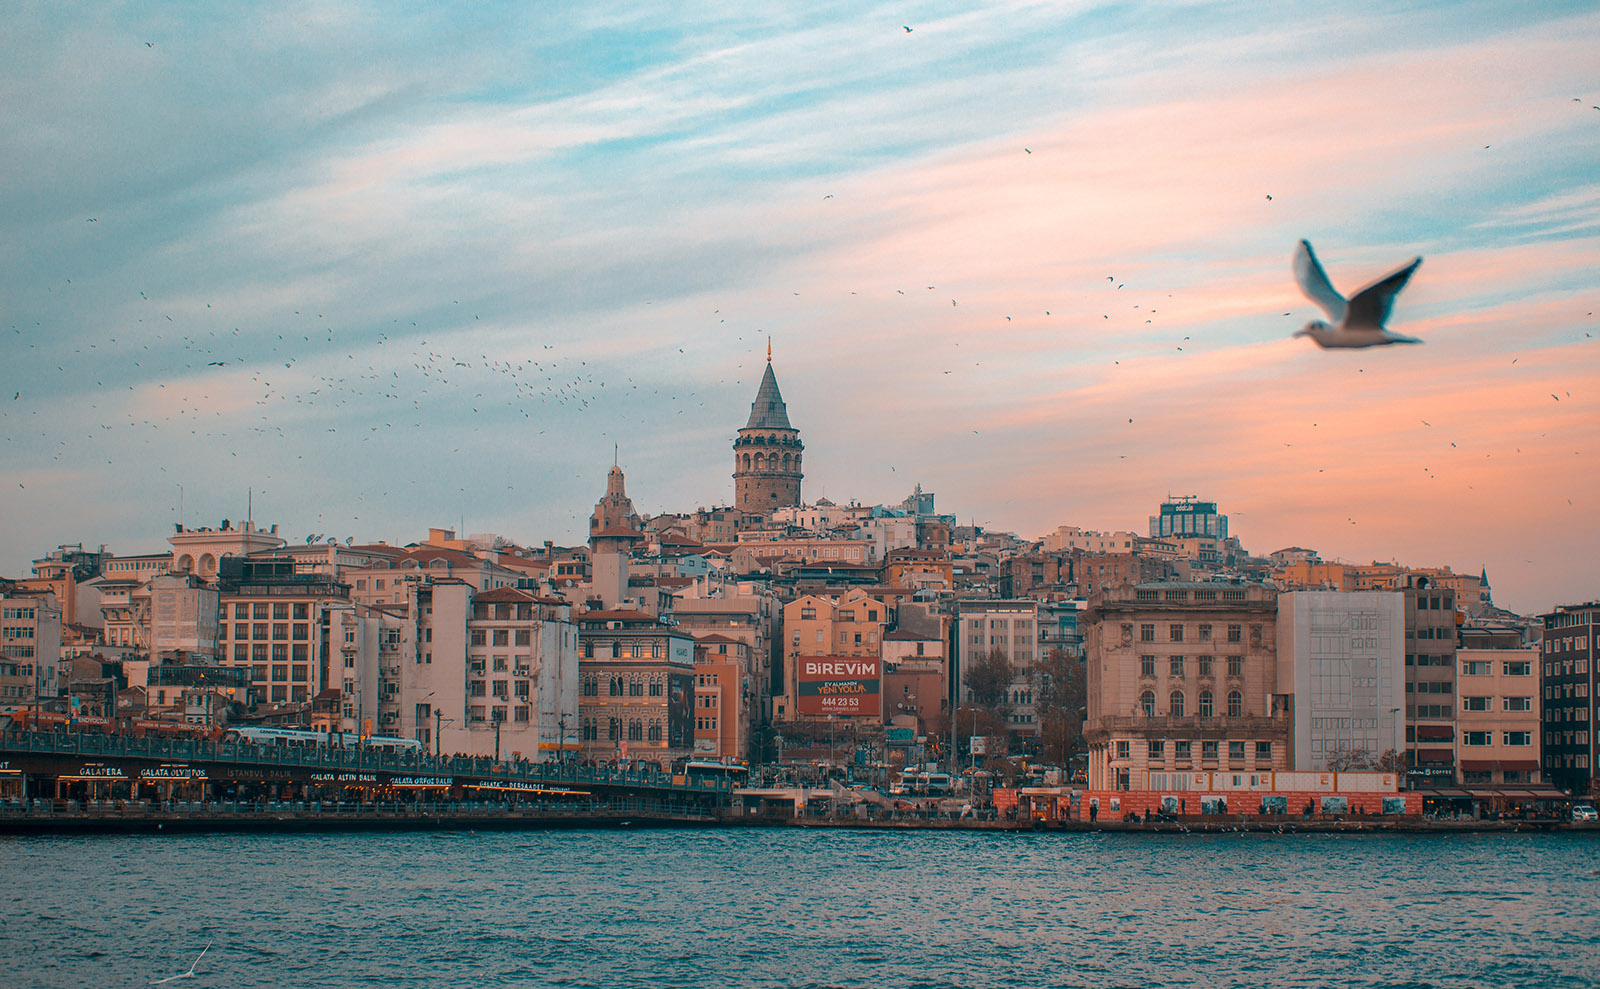 the view of istanbul from the water at sunset